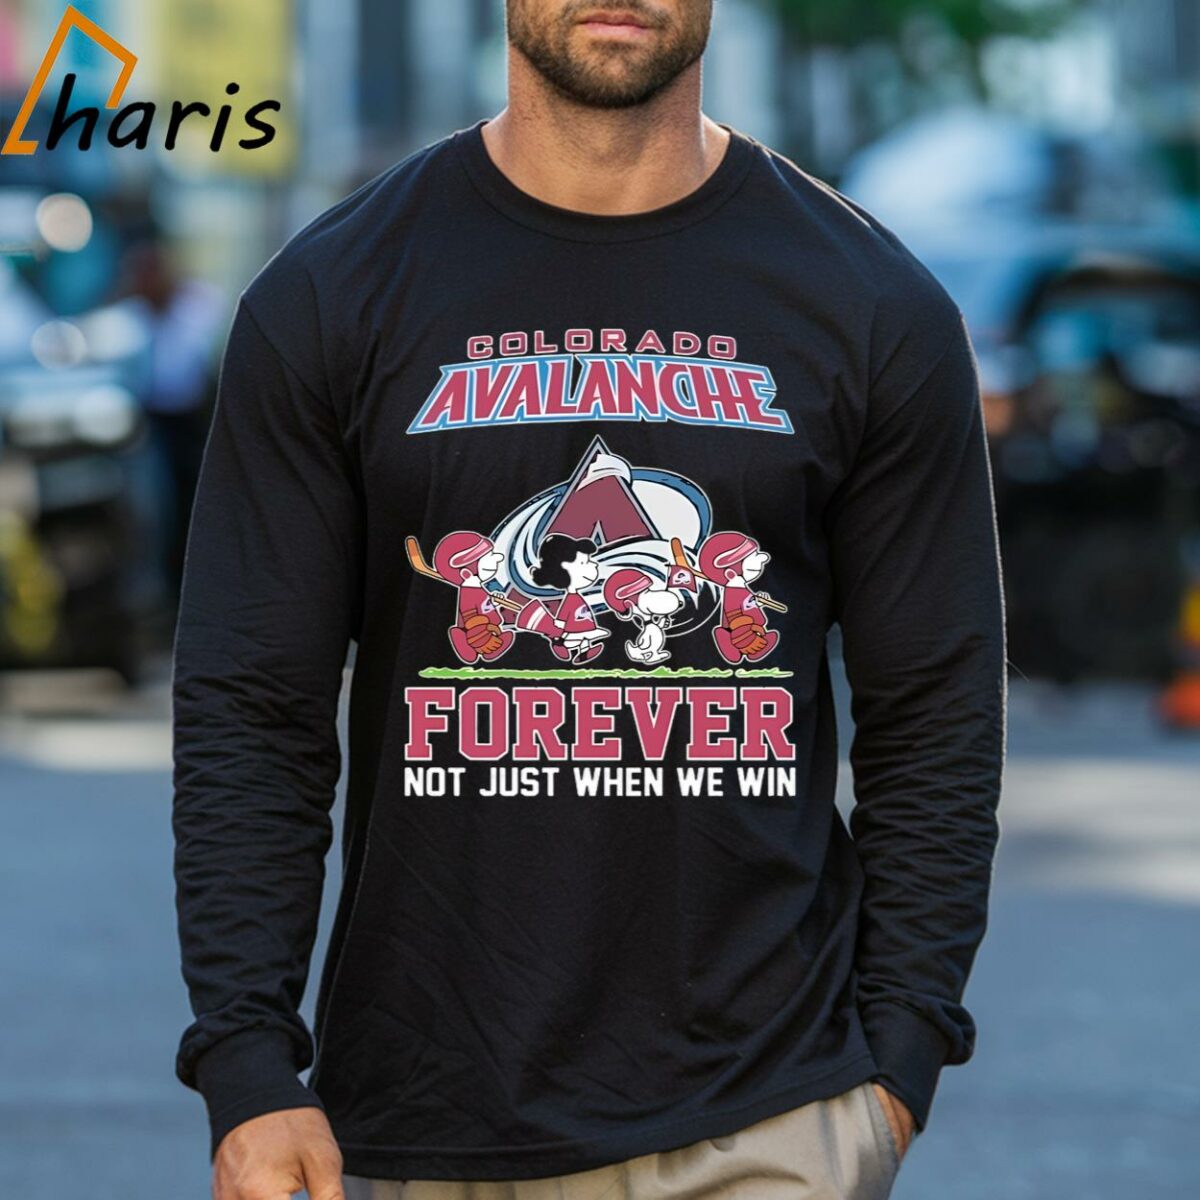 Colorado Avalanche Forever Not Just When We Win The Peanuts Movie Characters Shirt 3 Long sleeve shirt